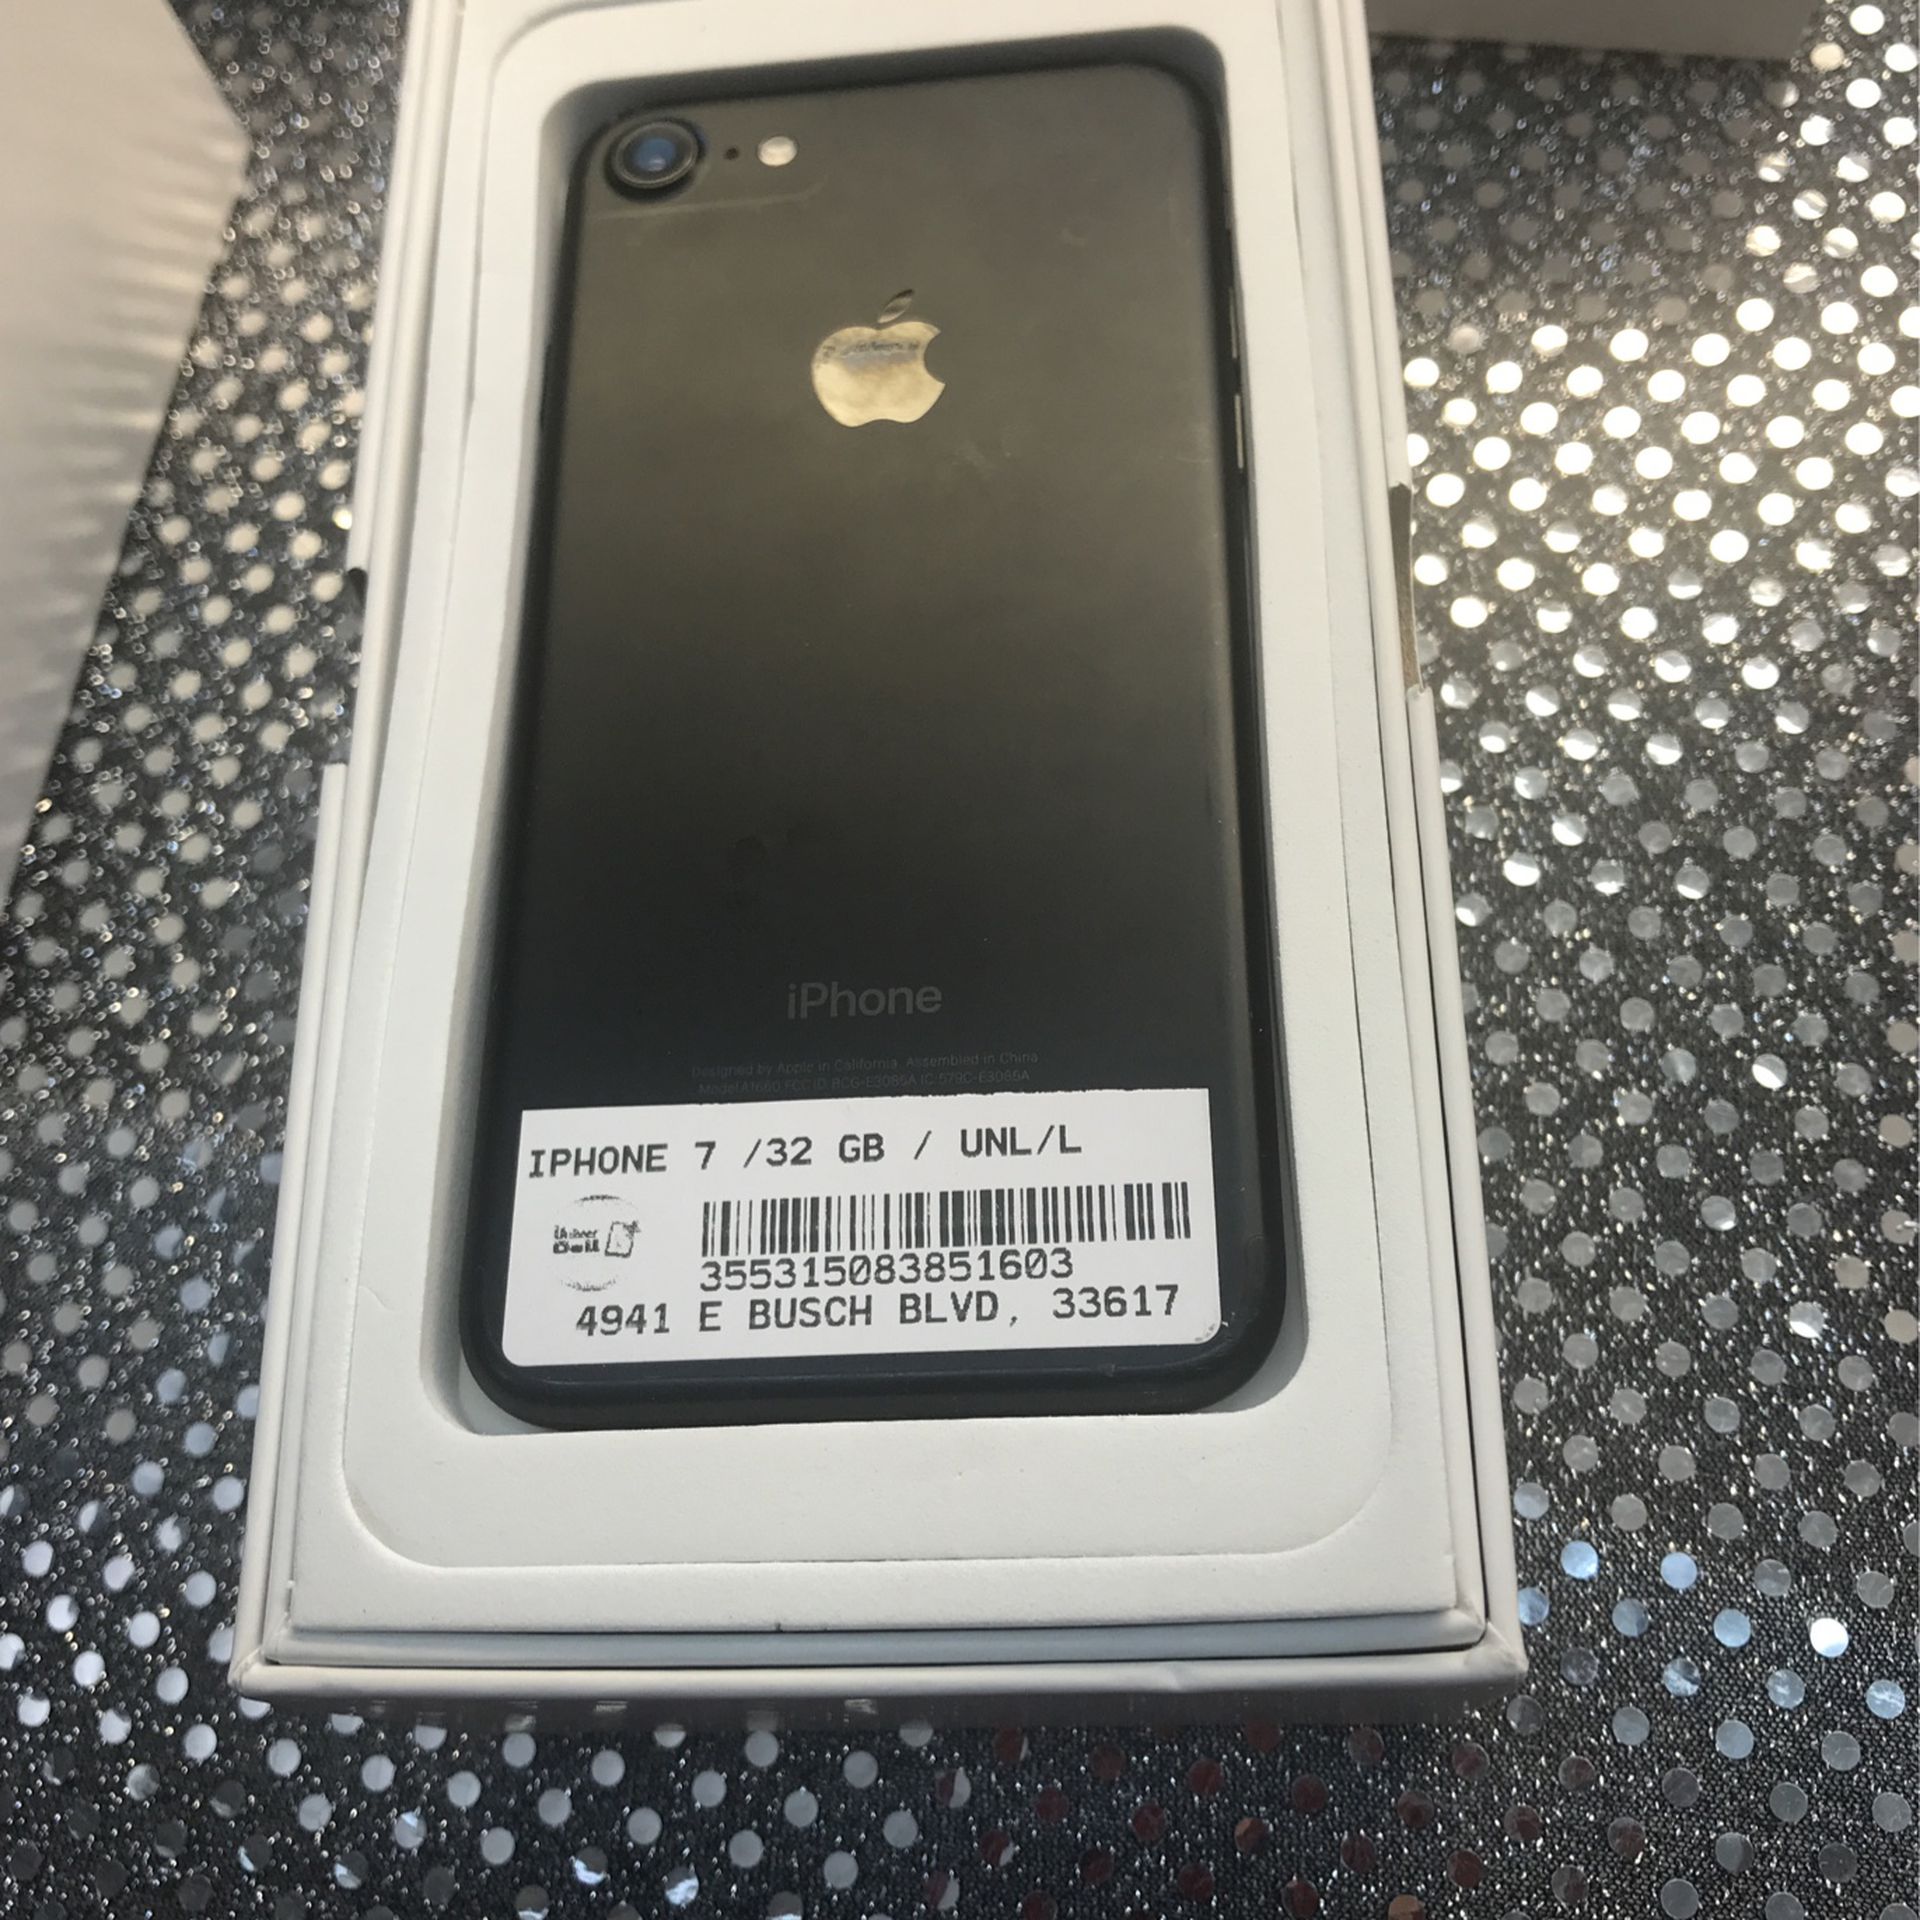 Unlocked iPhone 7 / 32Gb Clean With Warranty And Charger On Sale @ 4941 E Busch blvd #170, Tampa 33617